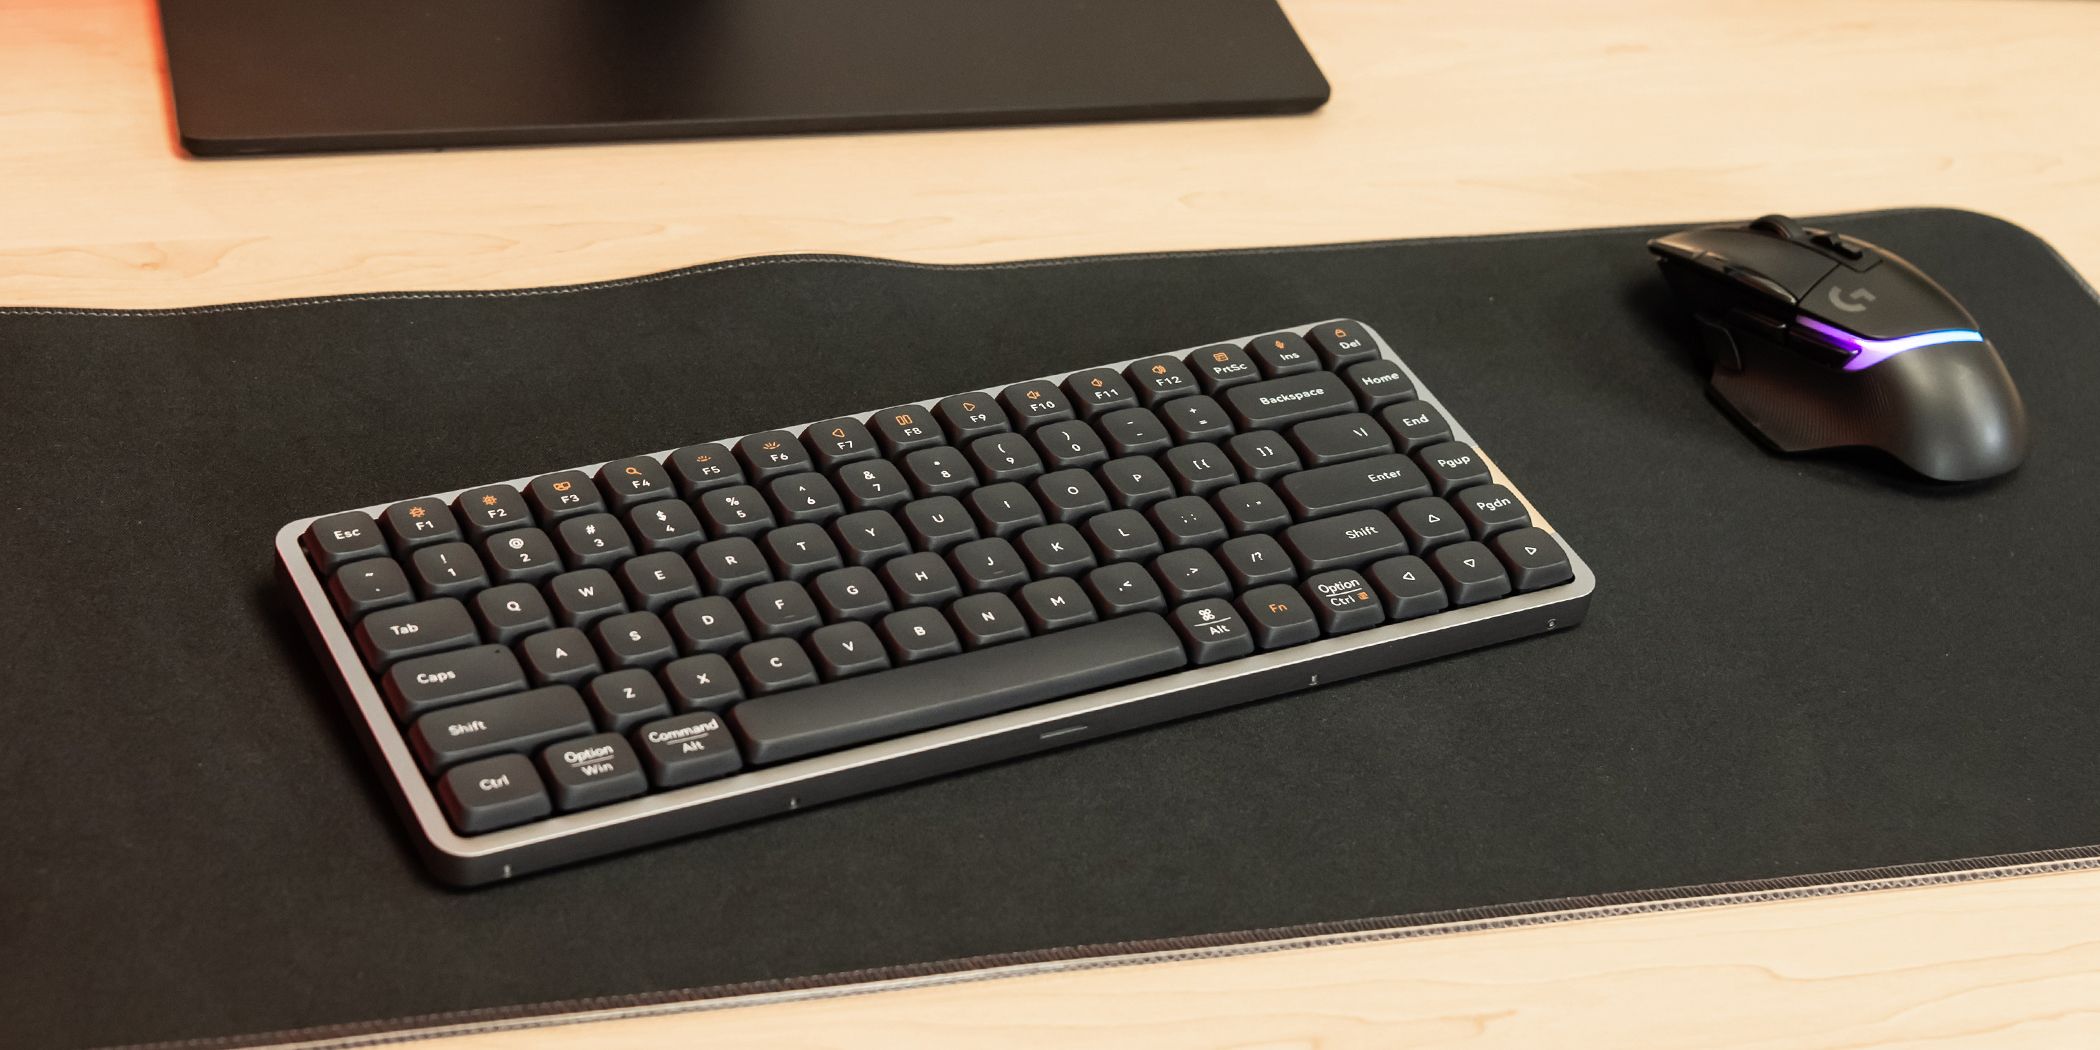 Lofree Flow keyboard next to a mouse